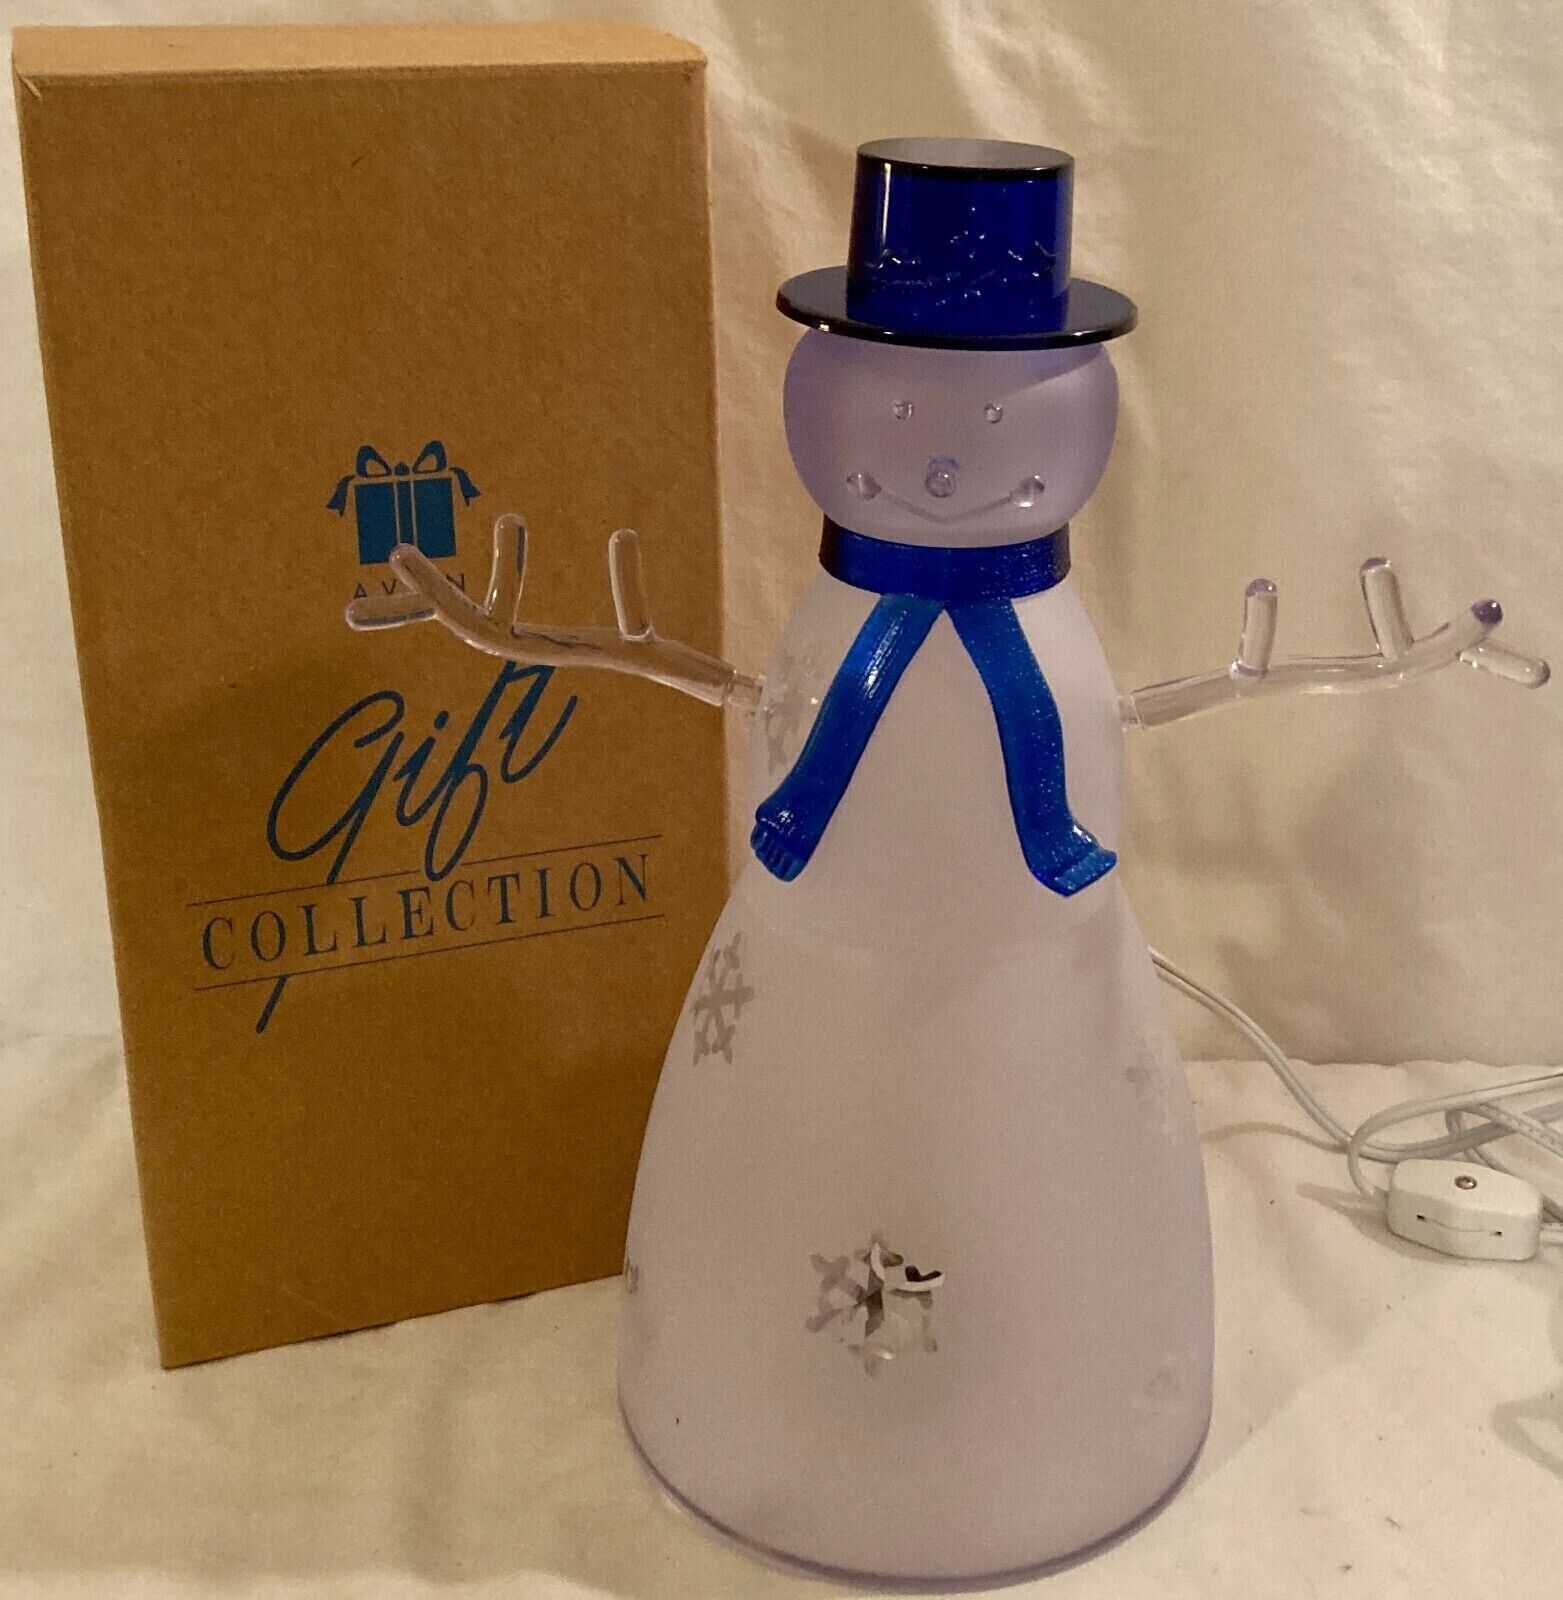 2001 Avon Gift Collection Brilliant Snowman Lamp w/Arms NOS